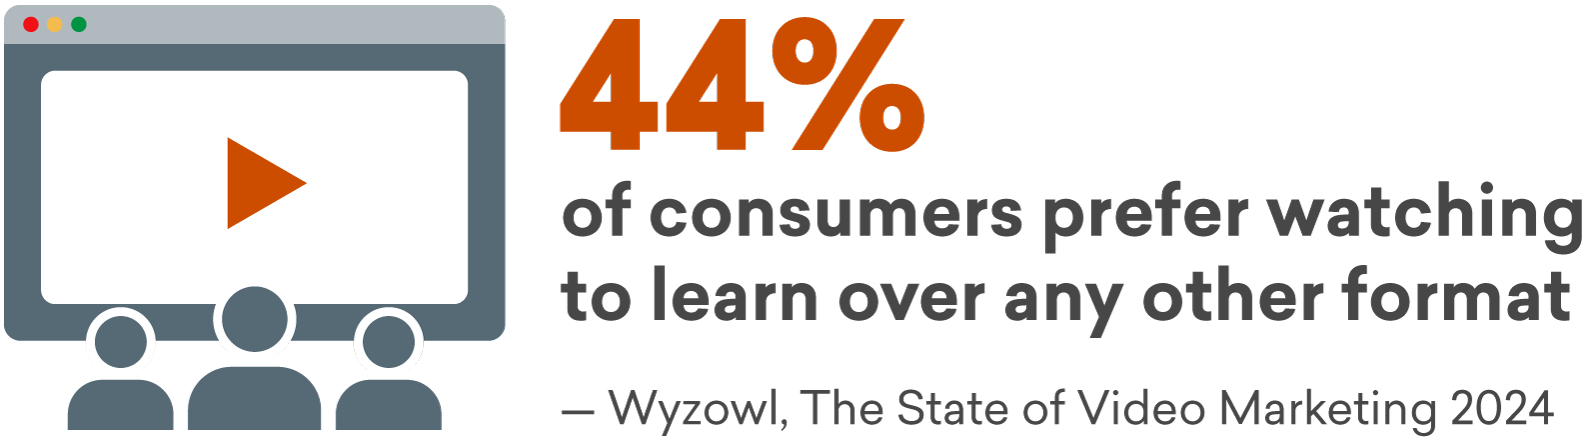 44% of consumers prefer video over any other format to learn infographic